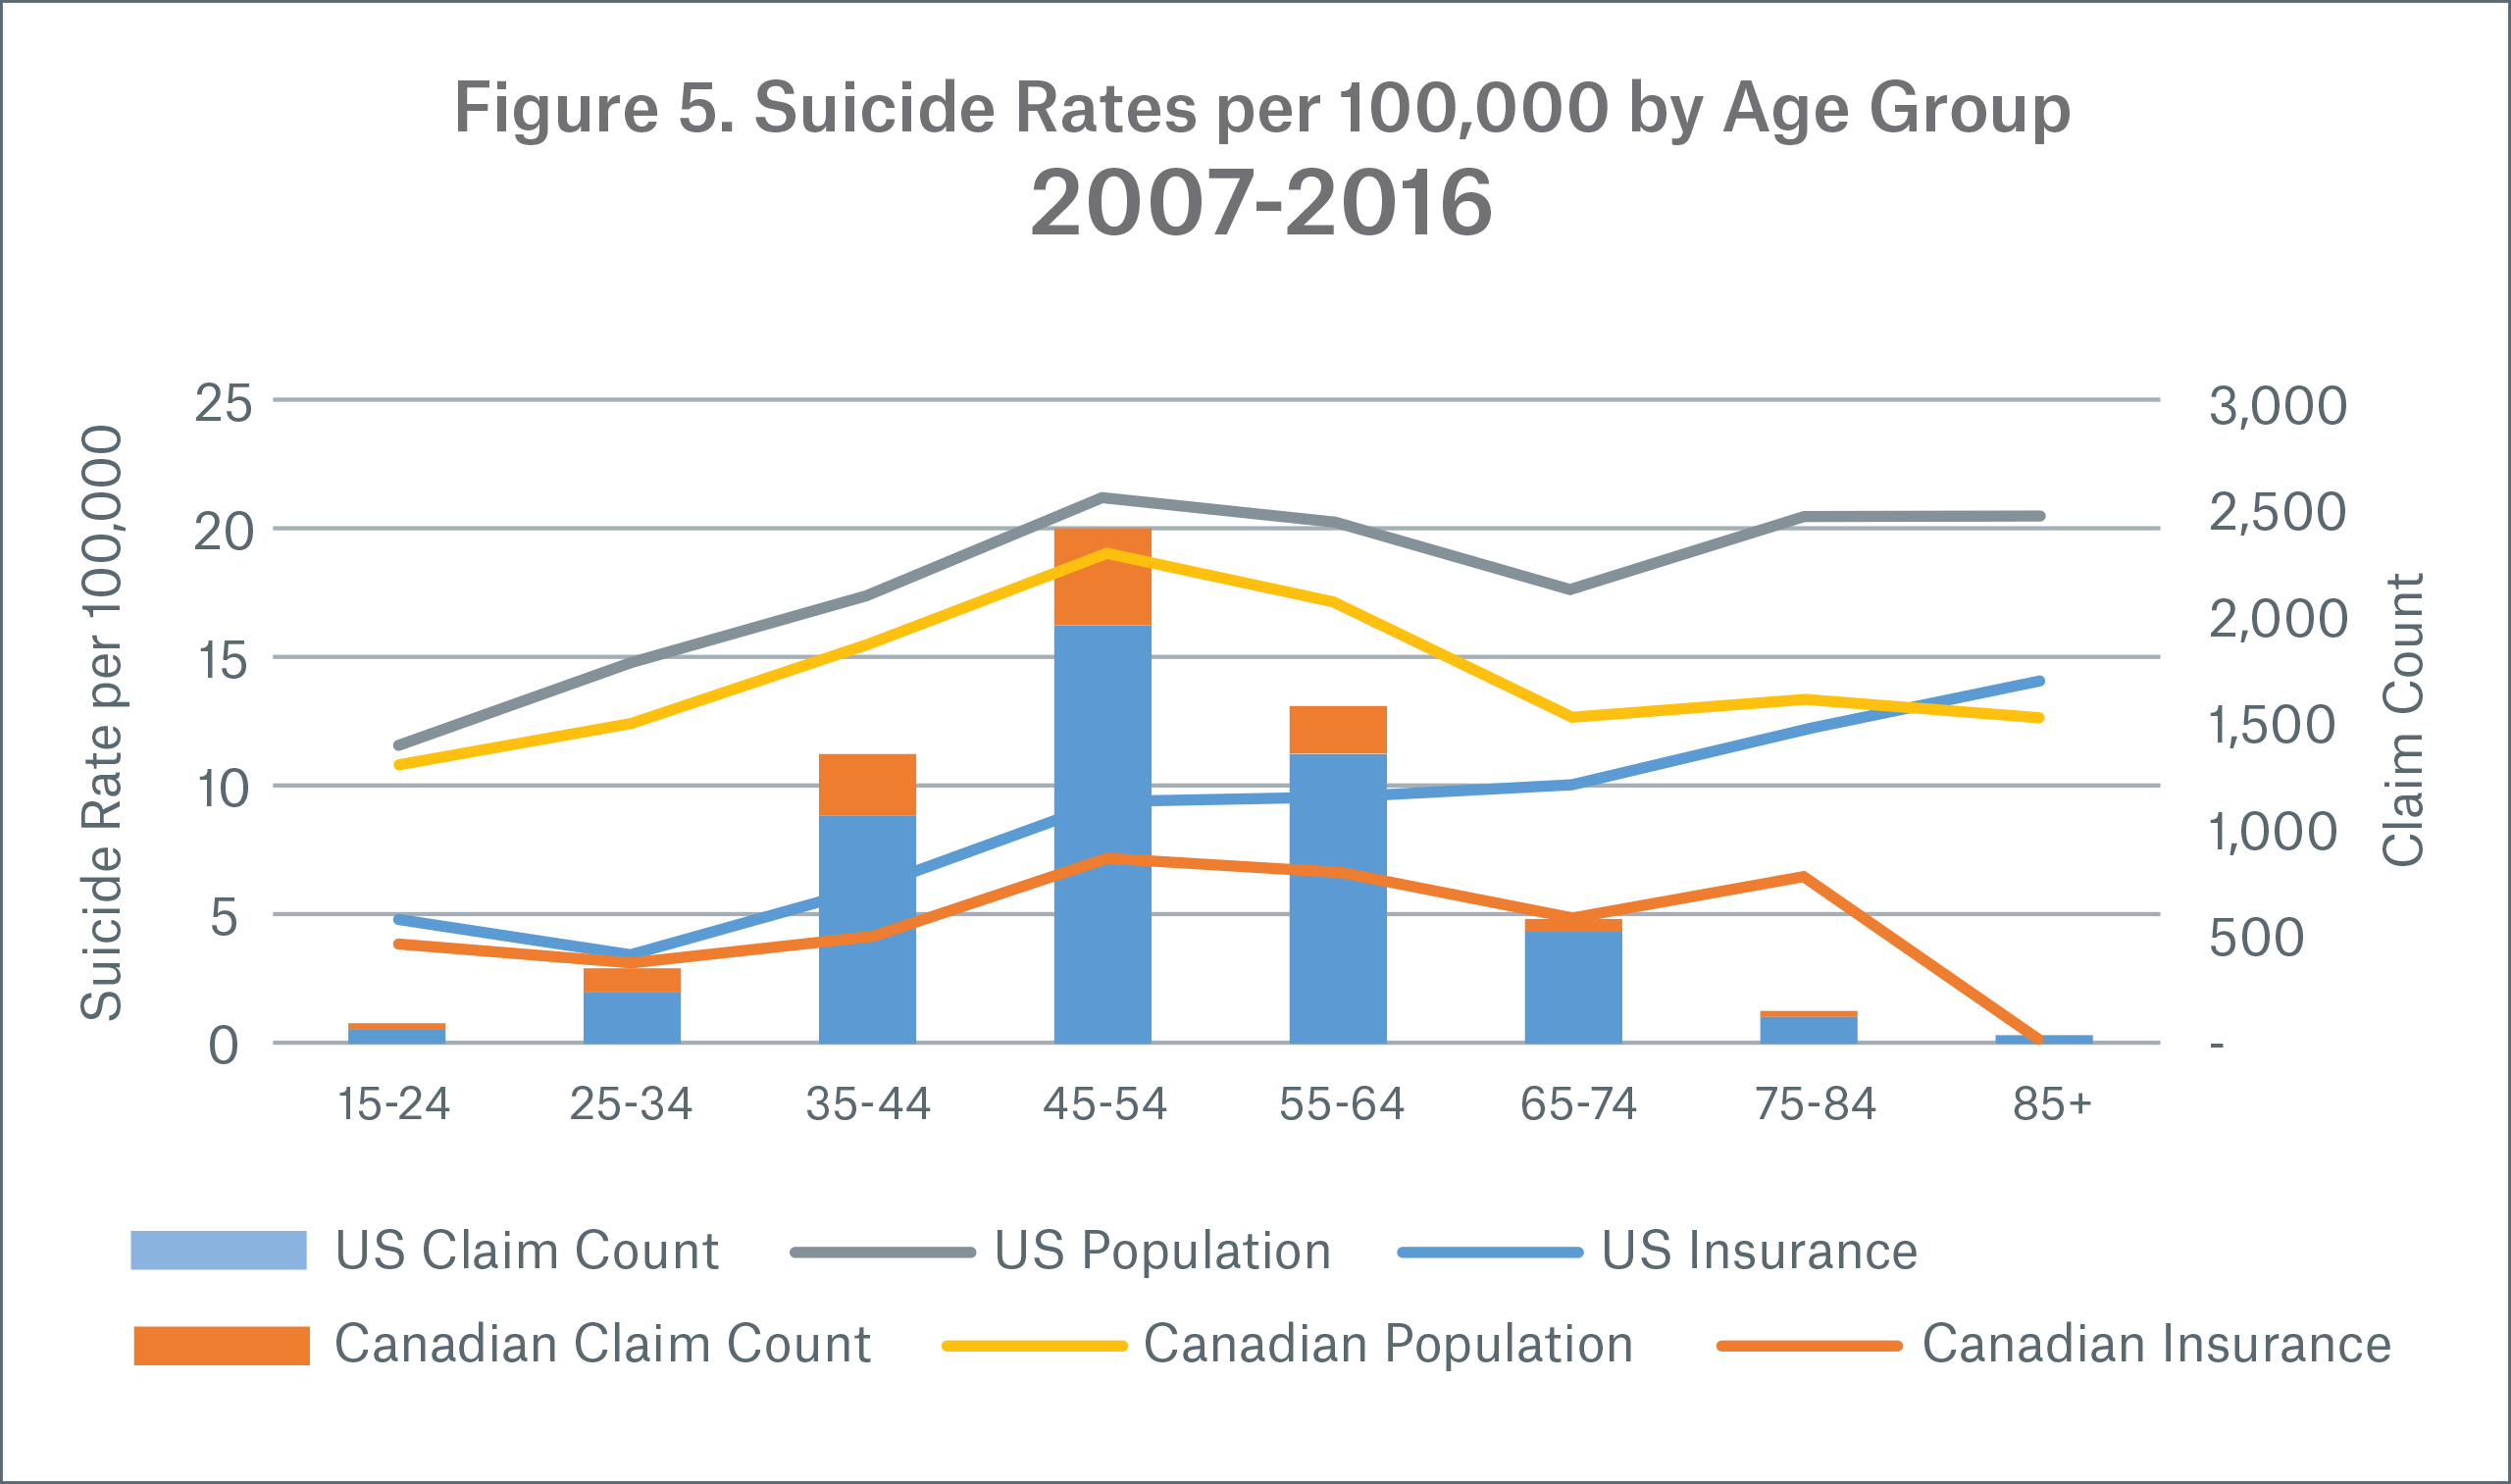 Figure 5 Image Suicide Rates per 100,000 by Age Group